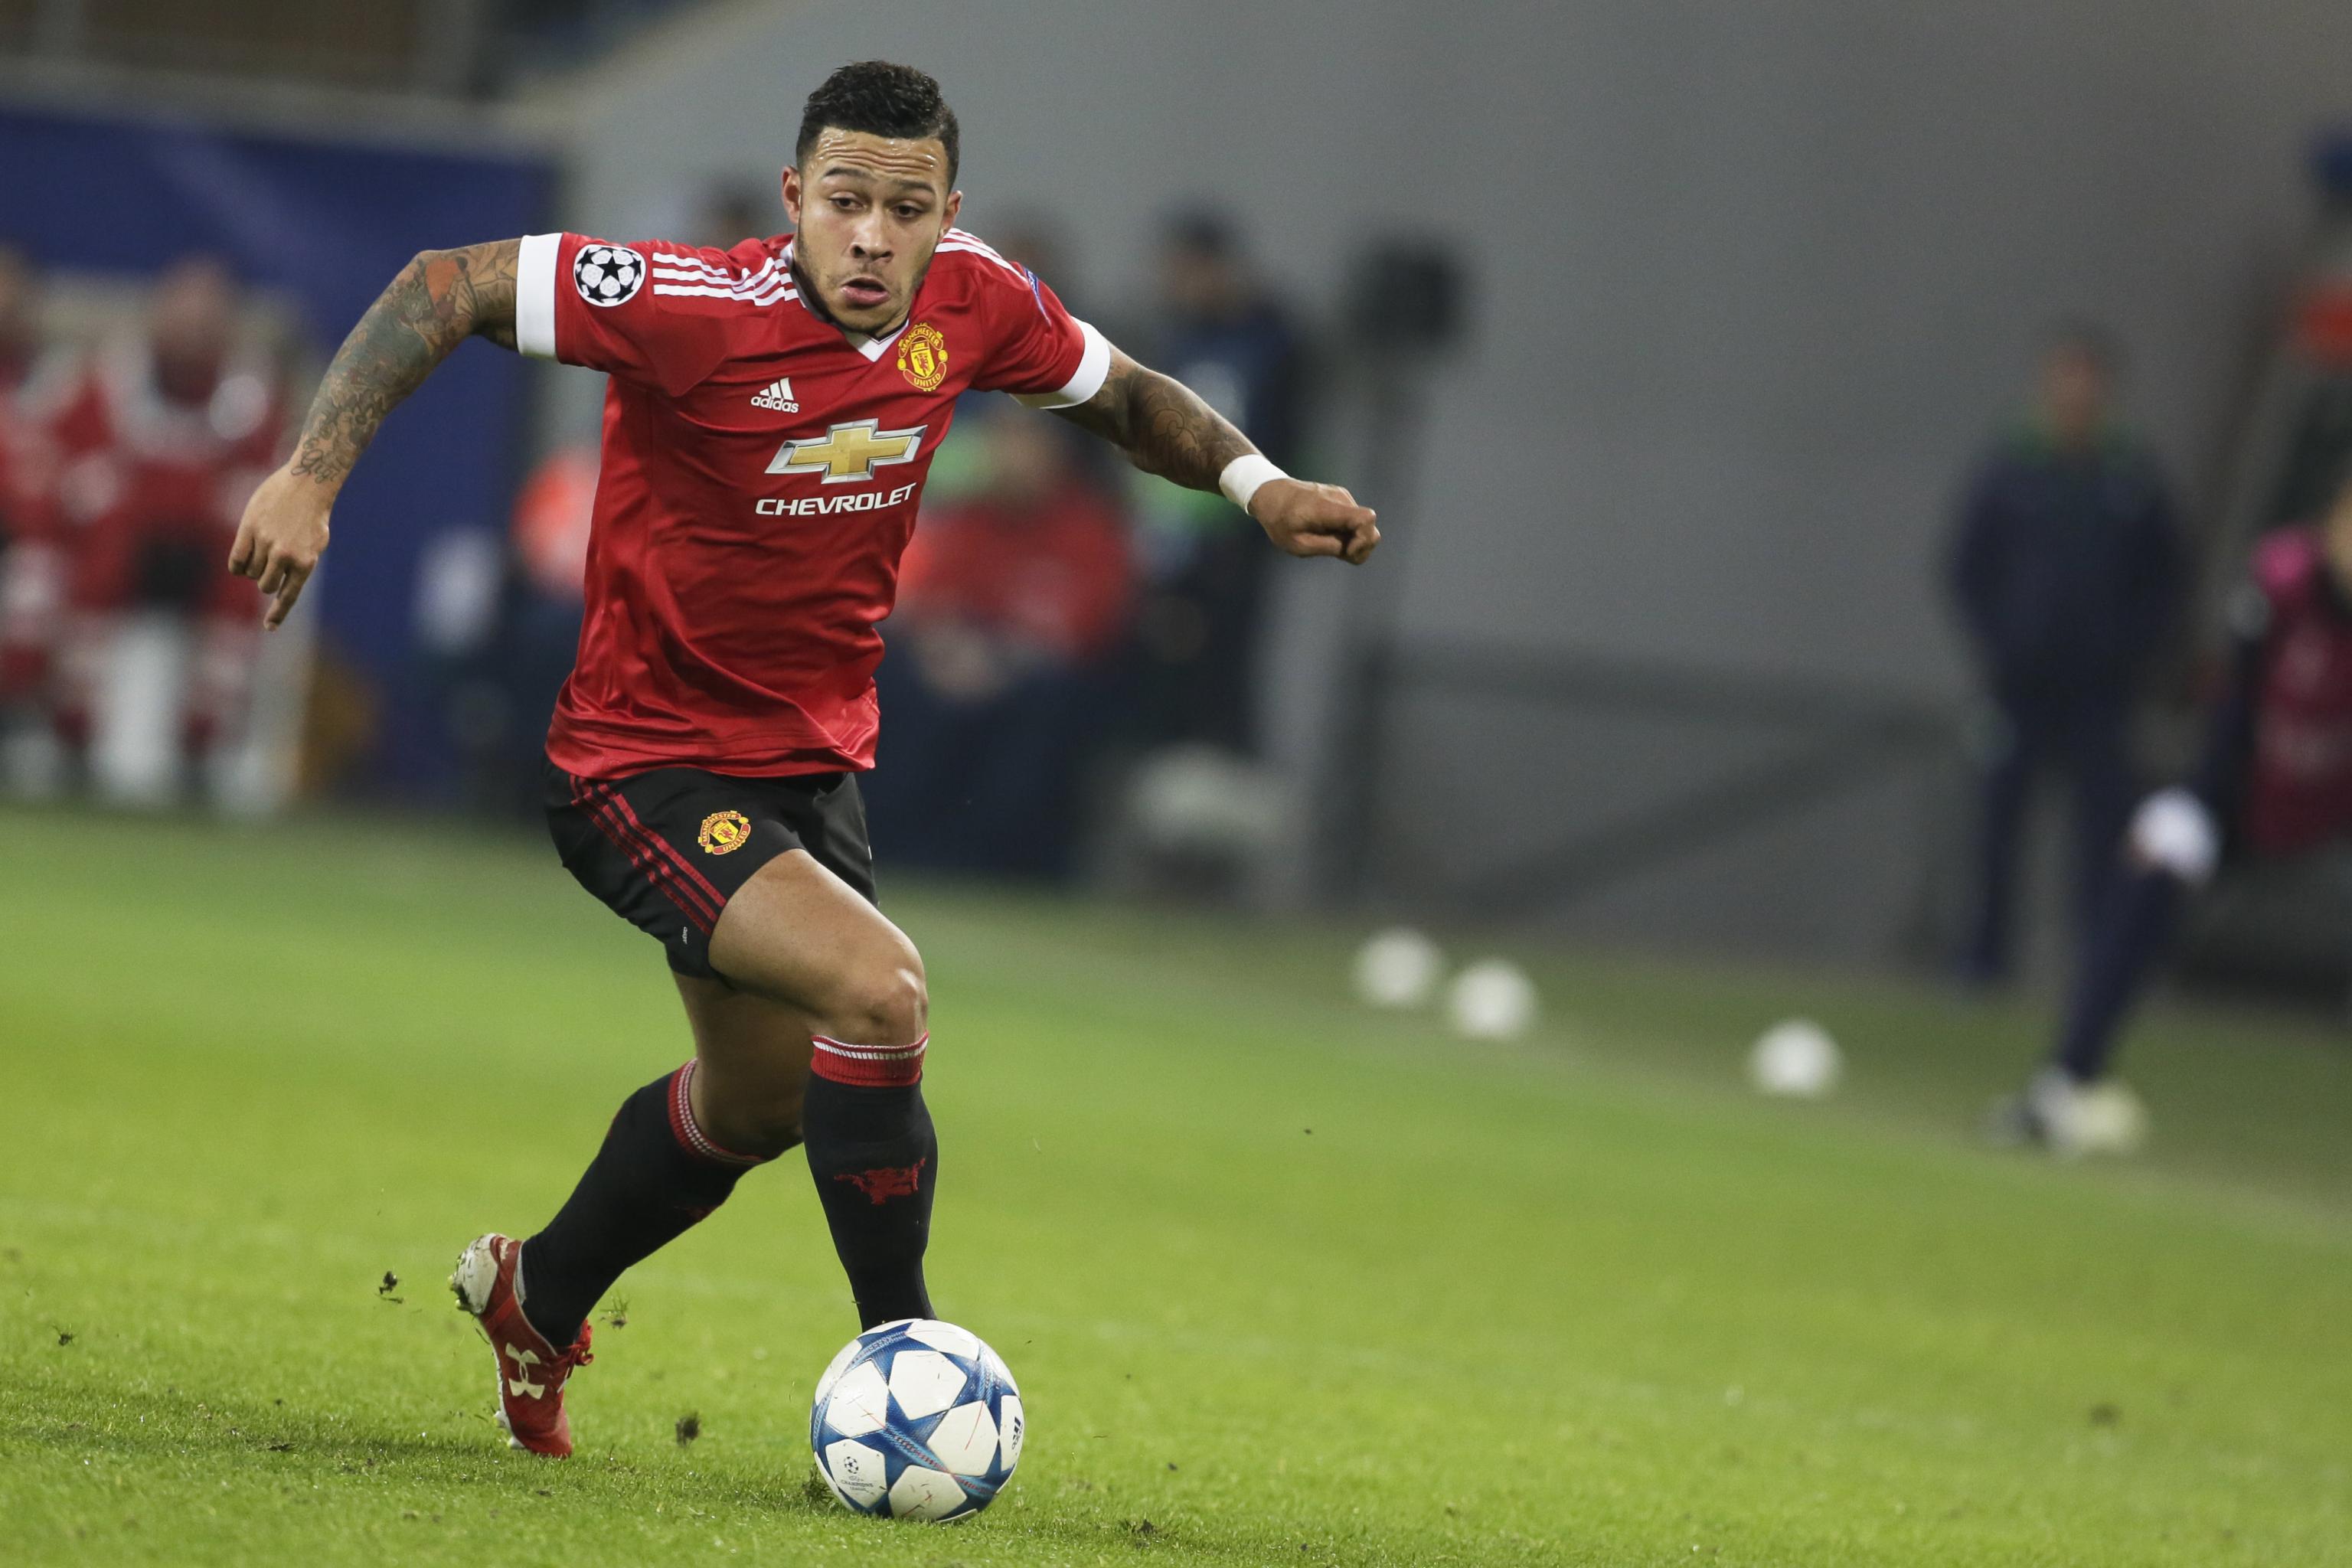 Memphis Depay collects Goal of the Year award in outrageous